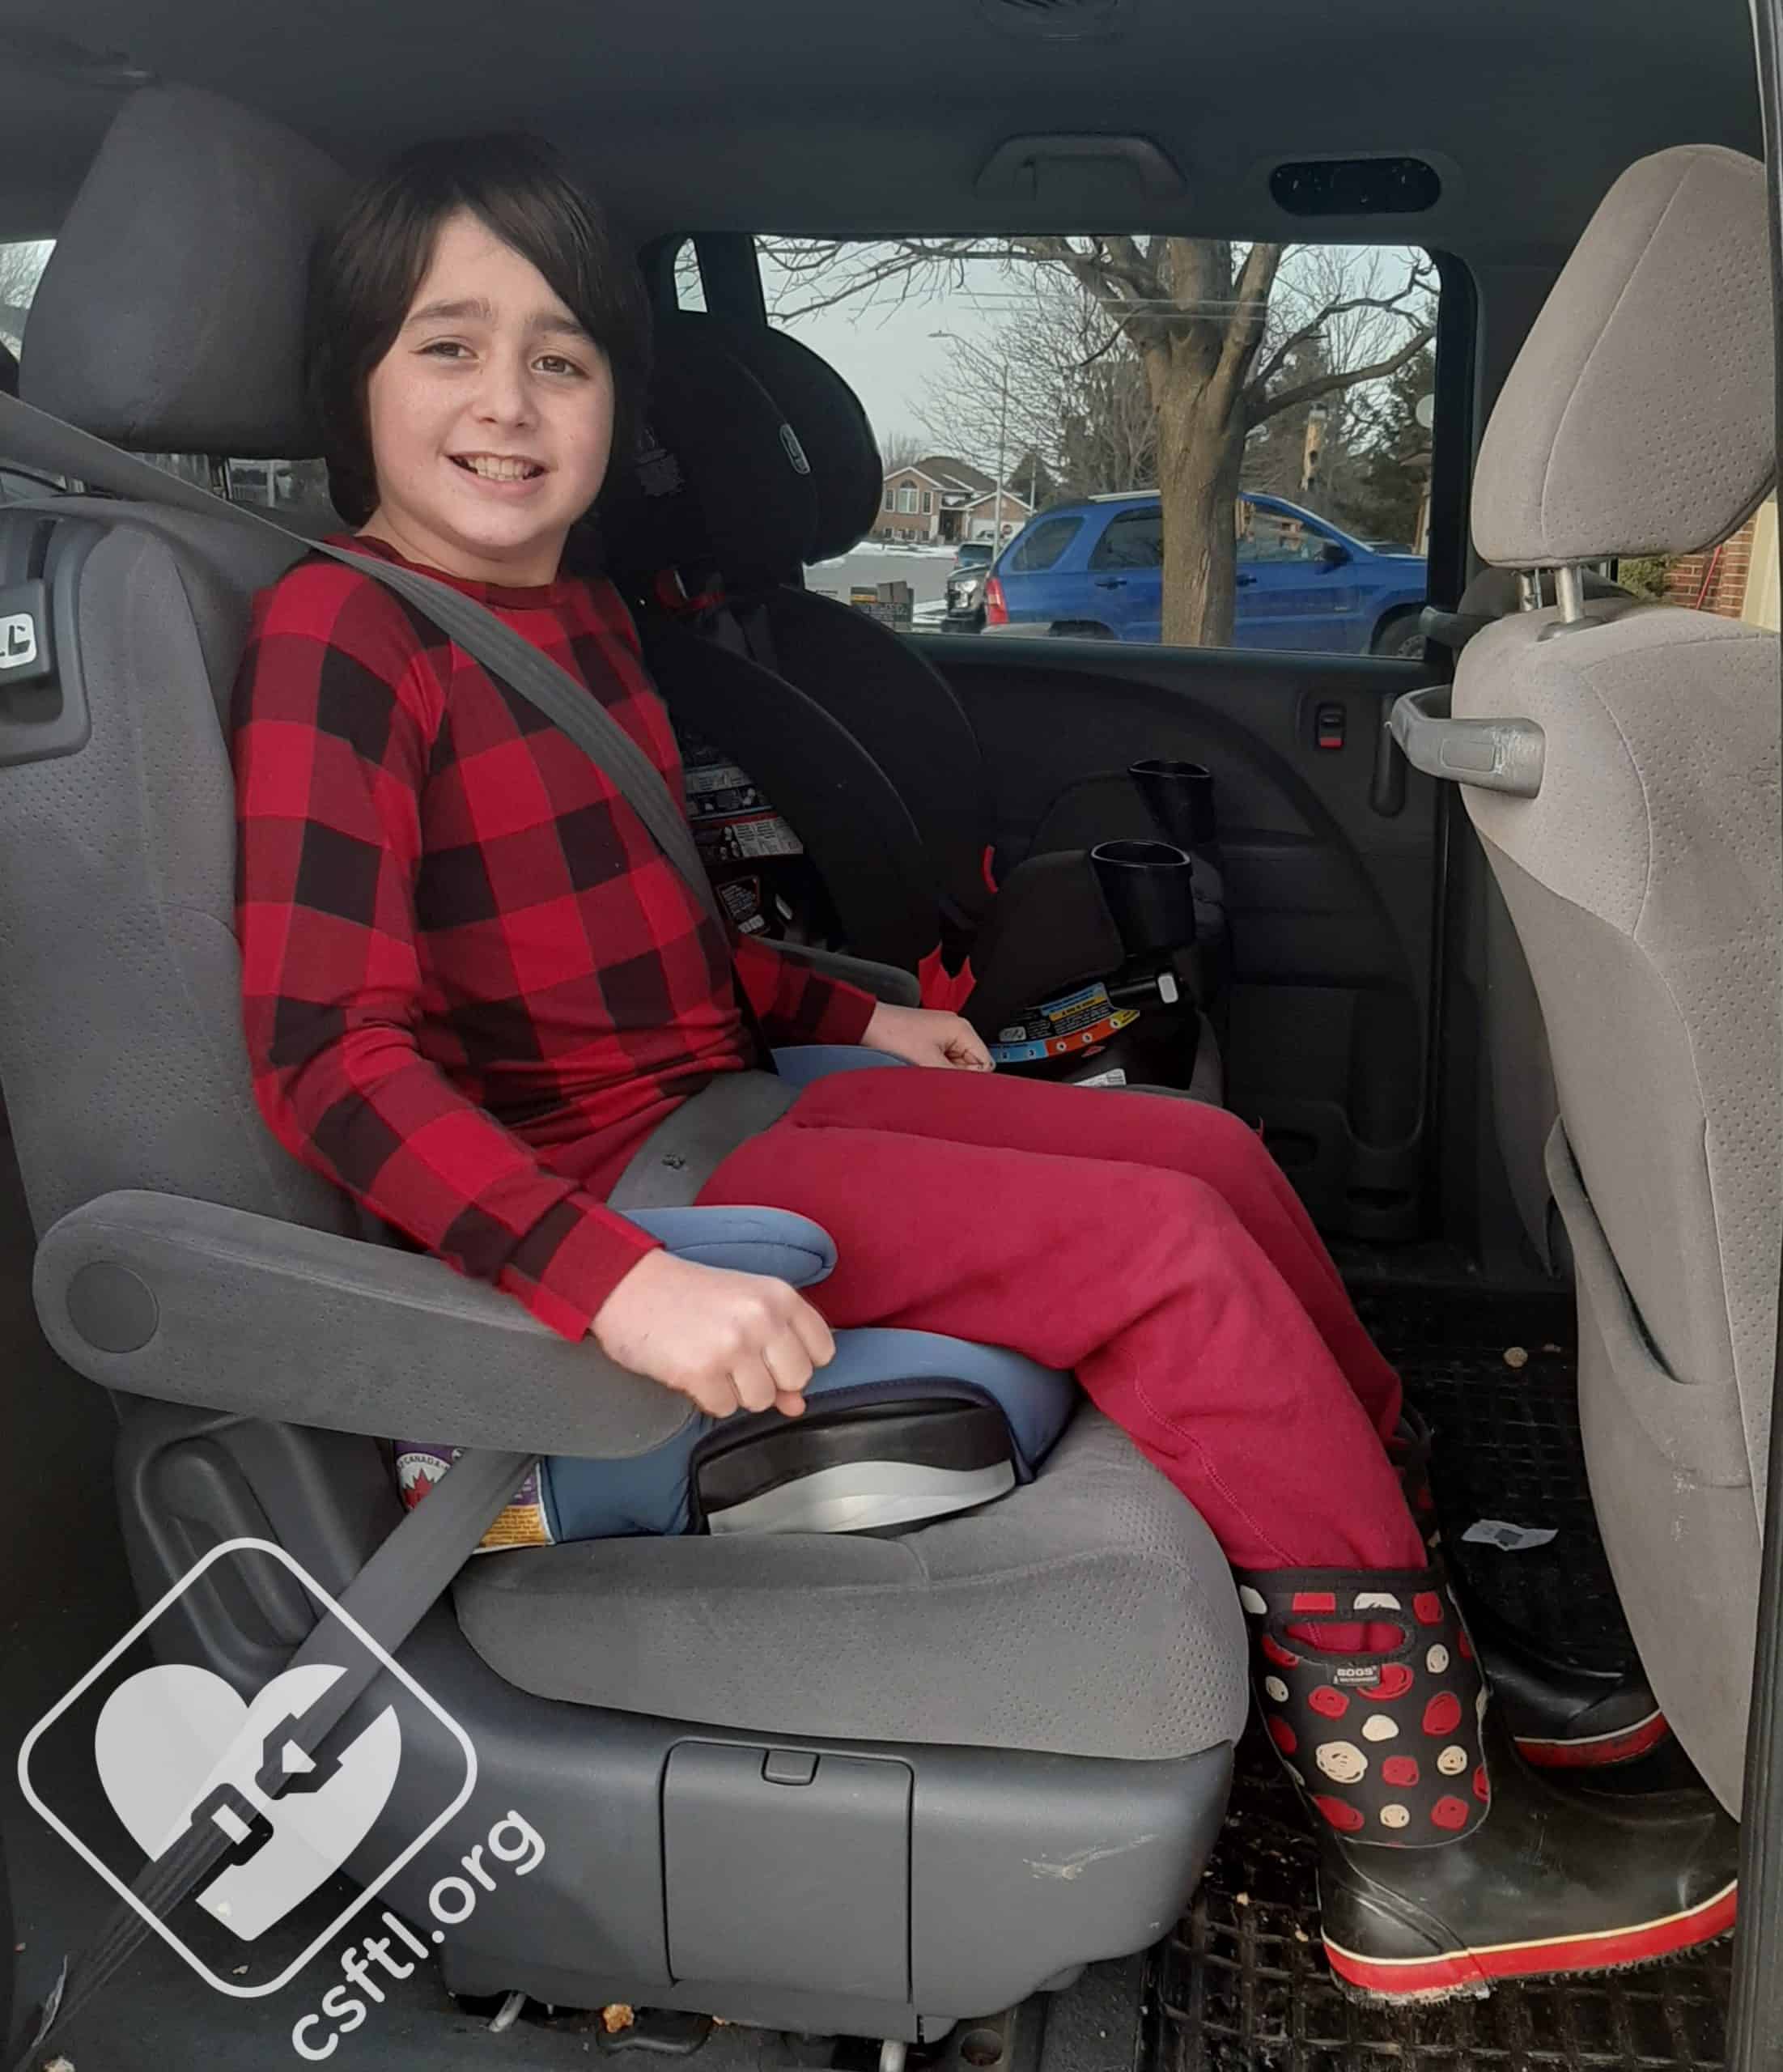 Car Seat Basics Boosters Are For Very, Can My 8 Year Old Use A Booster Seat